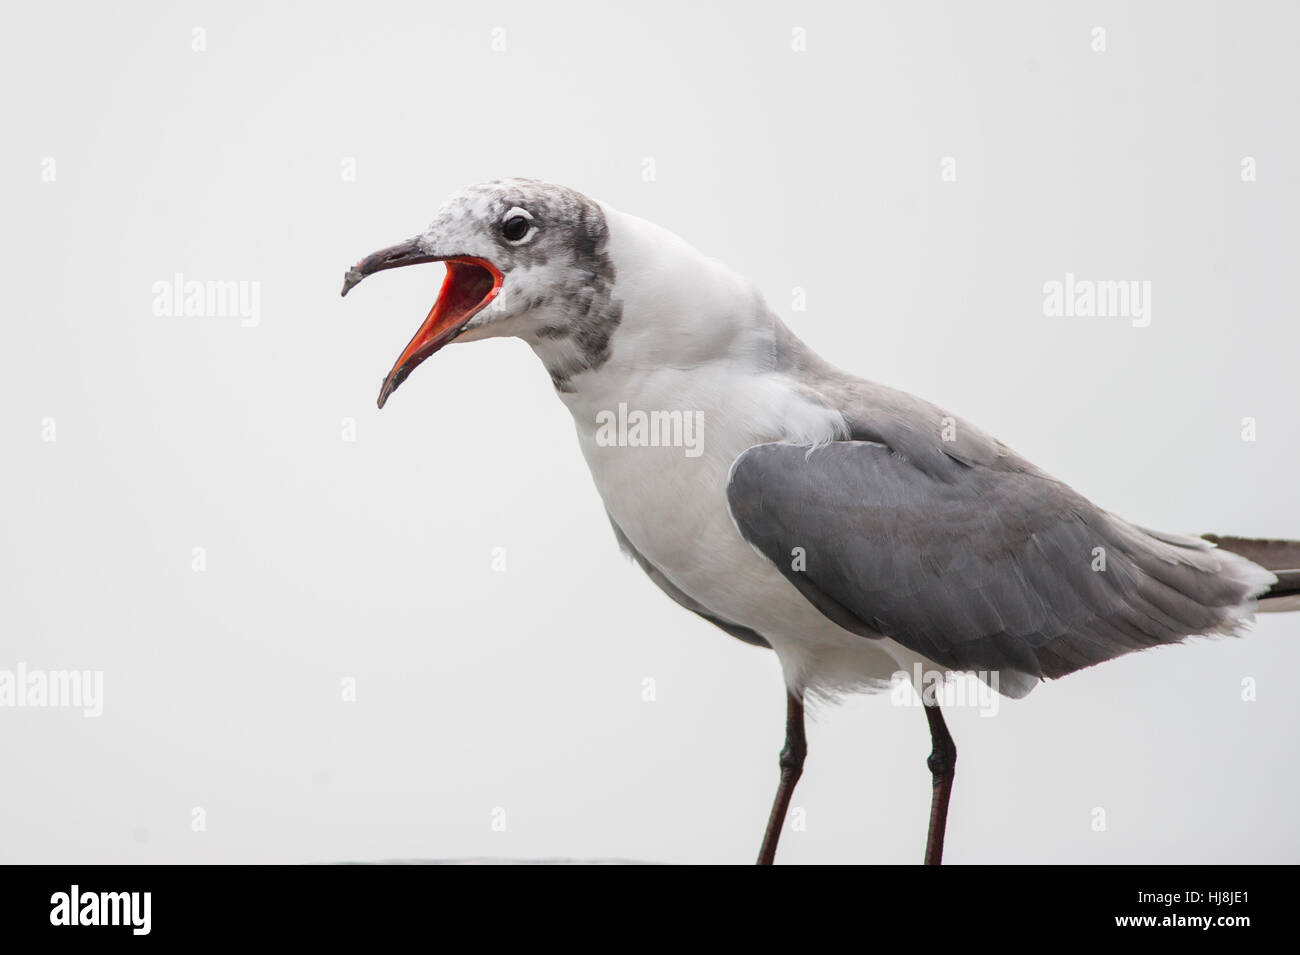 A Laughing Gull calls out loudly showing off its red mouth in front of a solid white background. Stock Photo